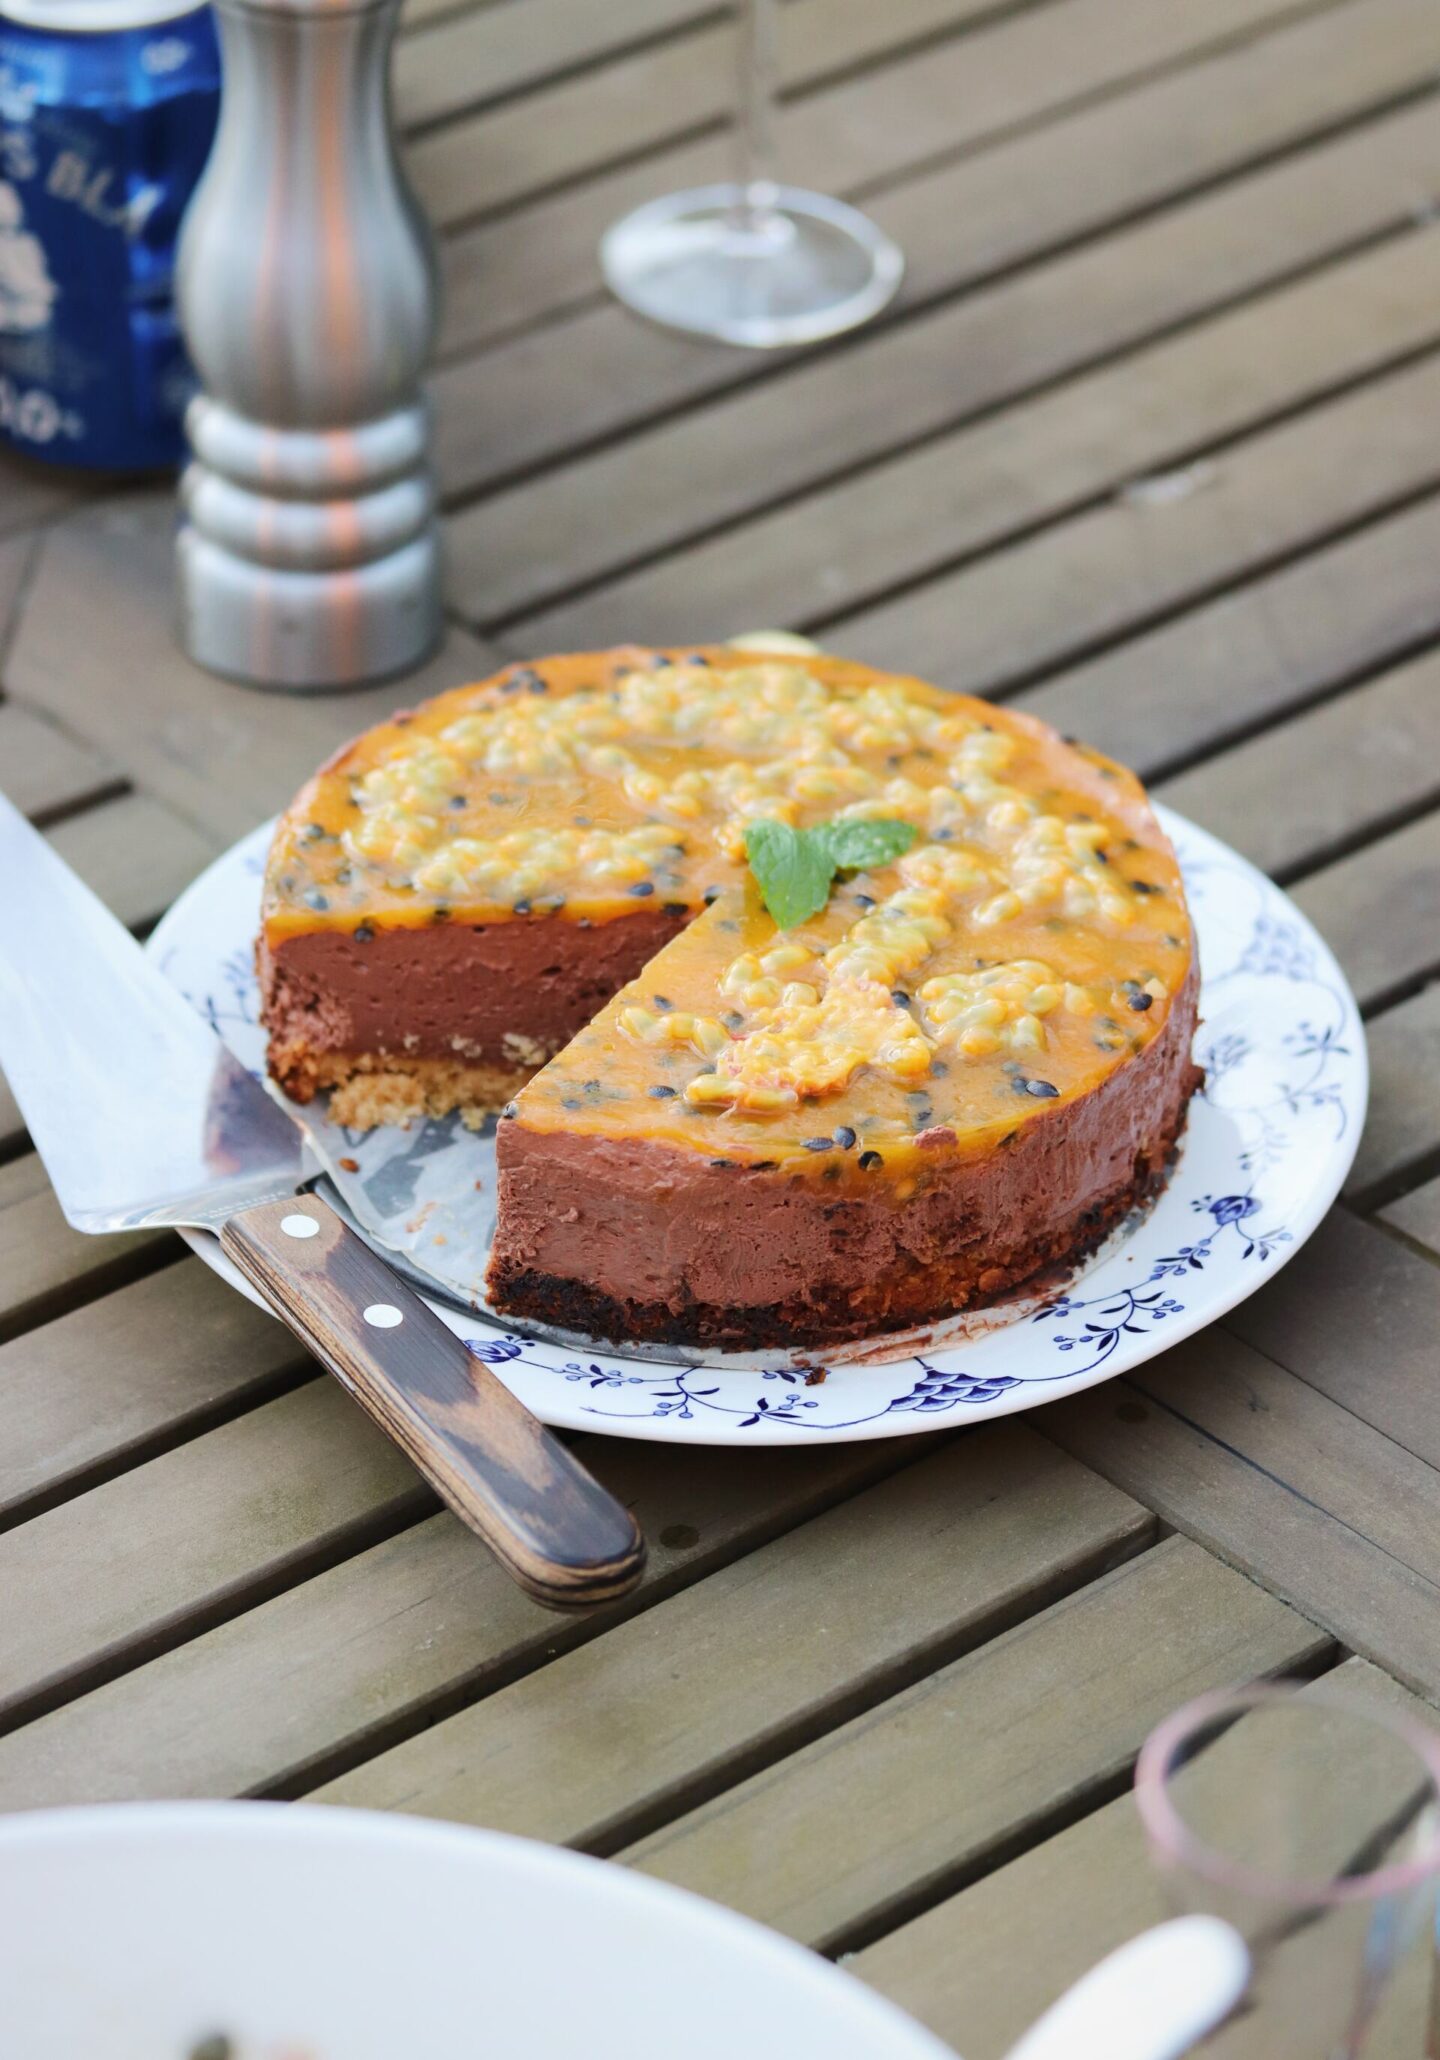 The Perfect Chocolate Mousse Cake with Passion fruit & Crumble Bottom